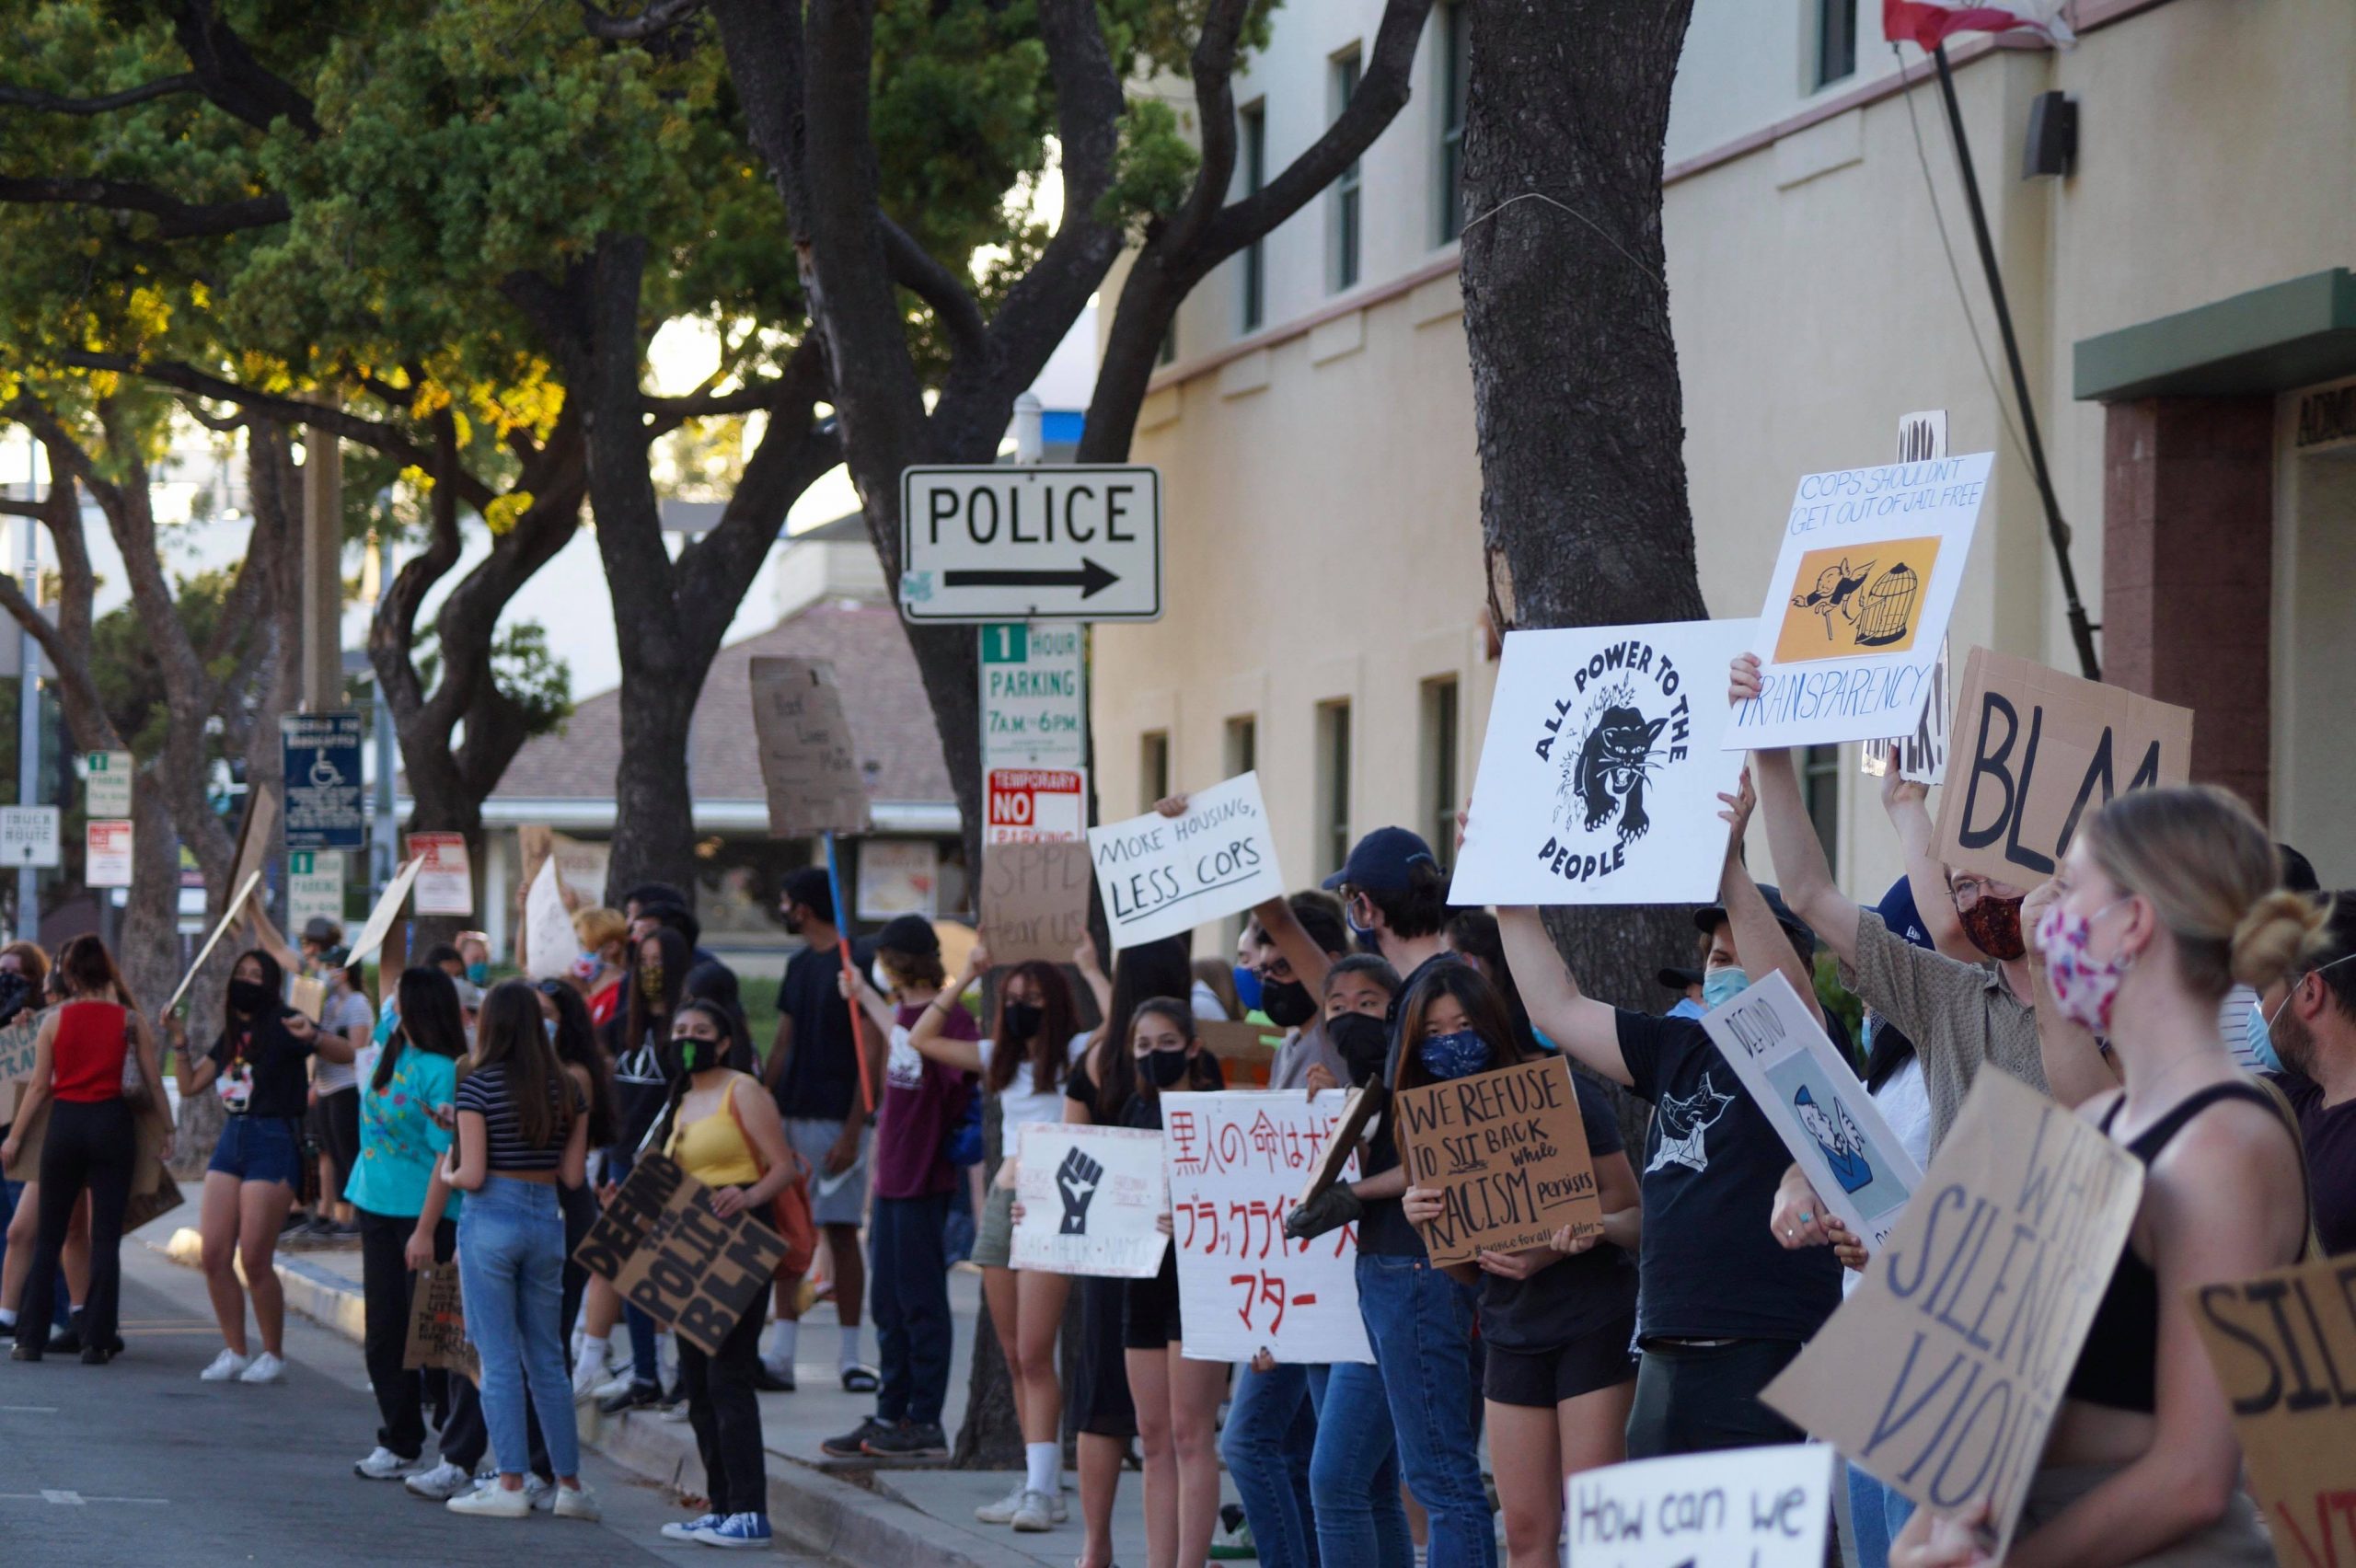 Thumbnail for Community assembles in front of City Hall, pressures City Council to reform SPPD